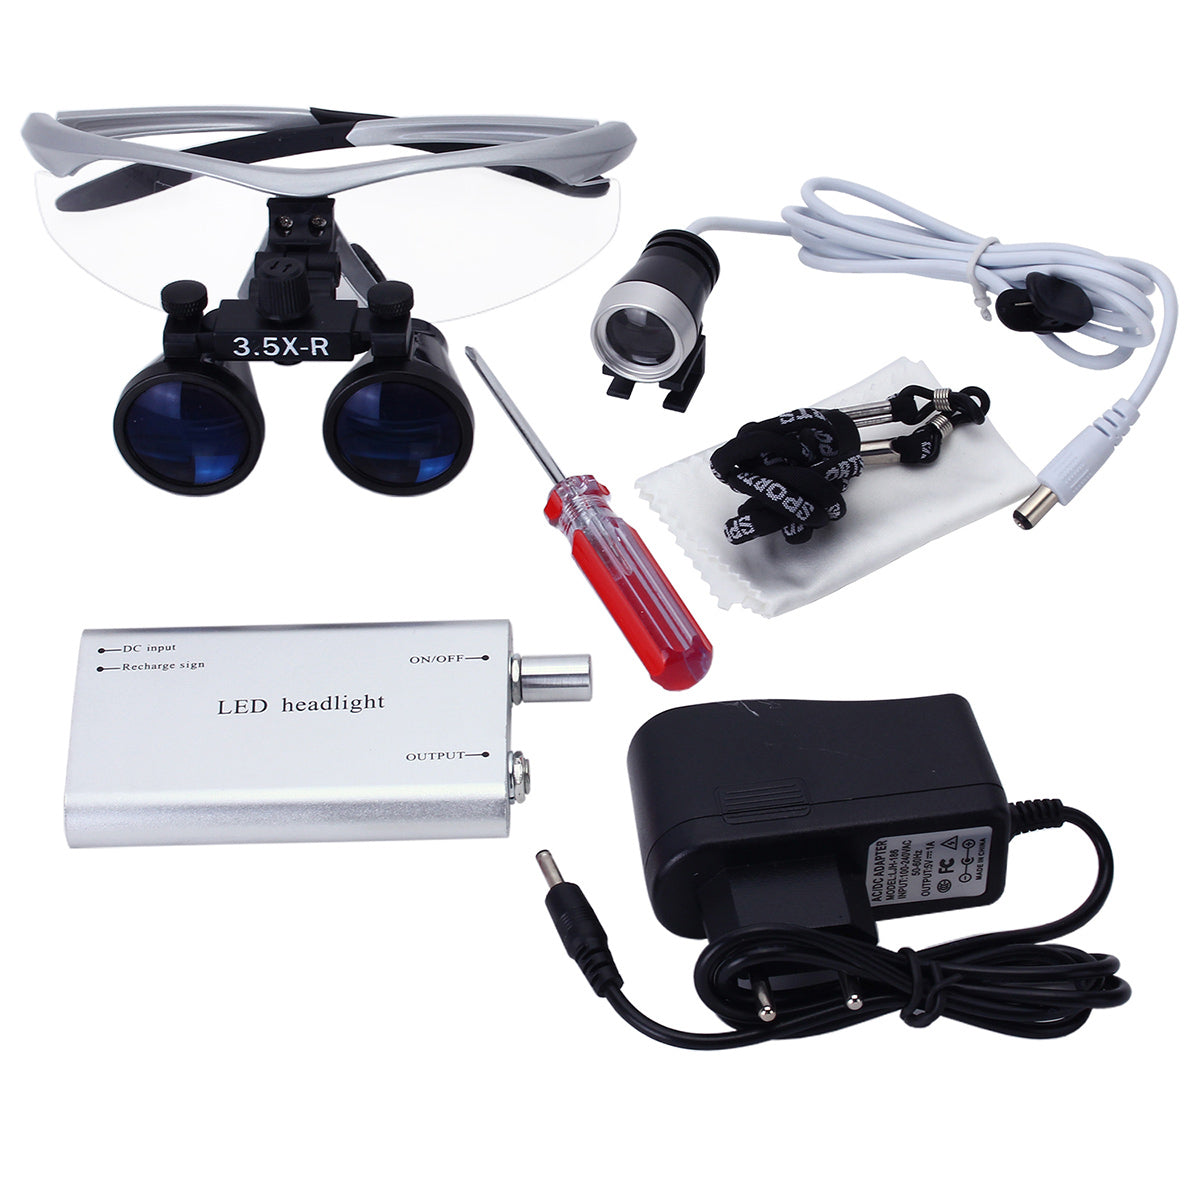 Dental Loupe 3.5X Magnification Binocular Magnifier with Headlight Silver - pairaydental.com